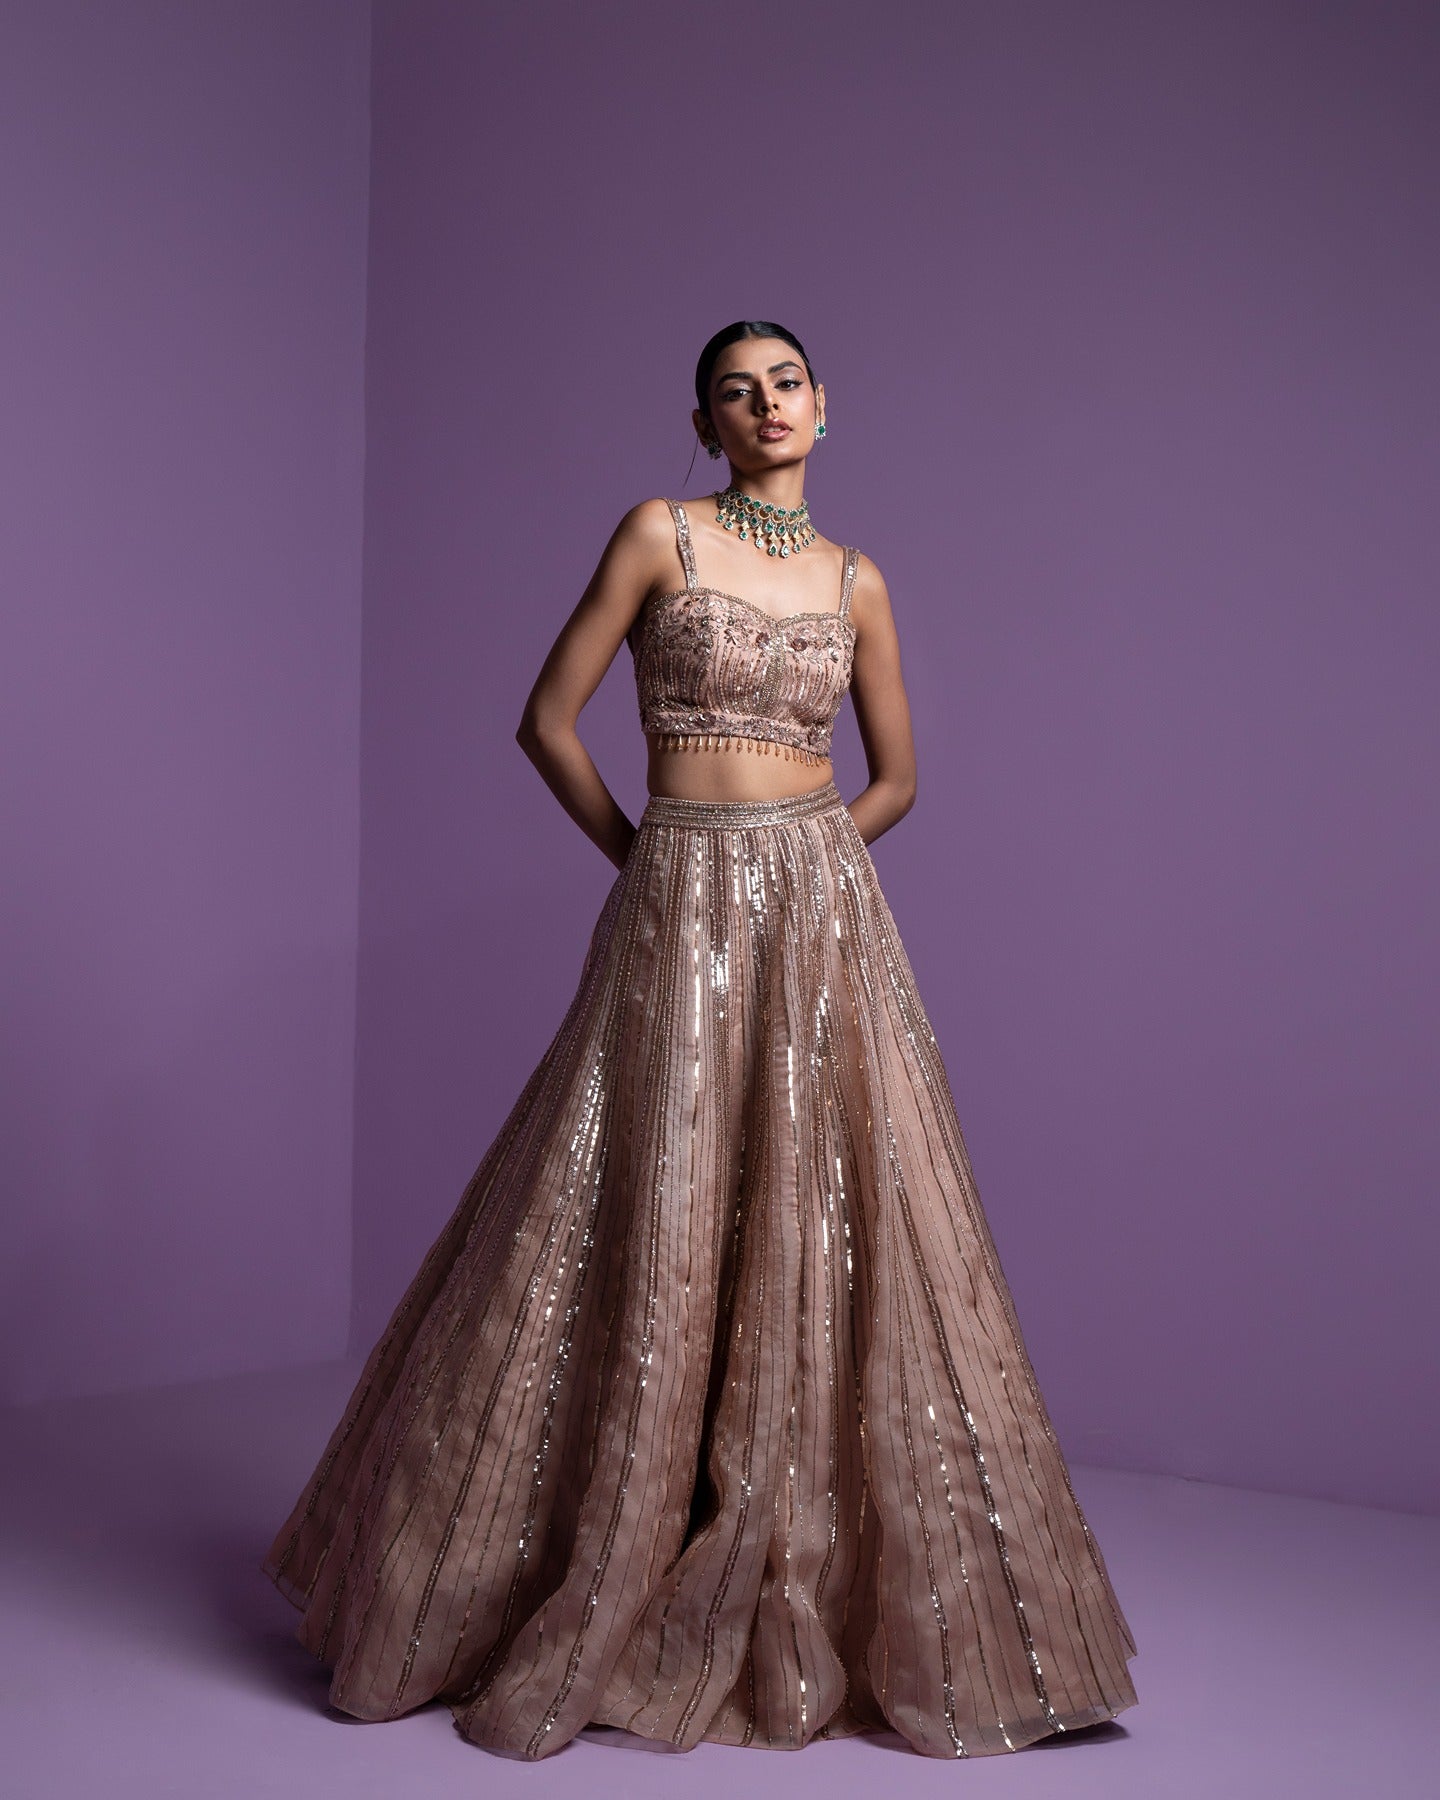 Draped in elegance and adorned in gold, this lehenga radiates timeless beauty and regal charm. A touch of glamour for moments that shimmer with splendor.